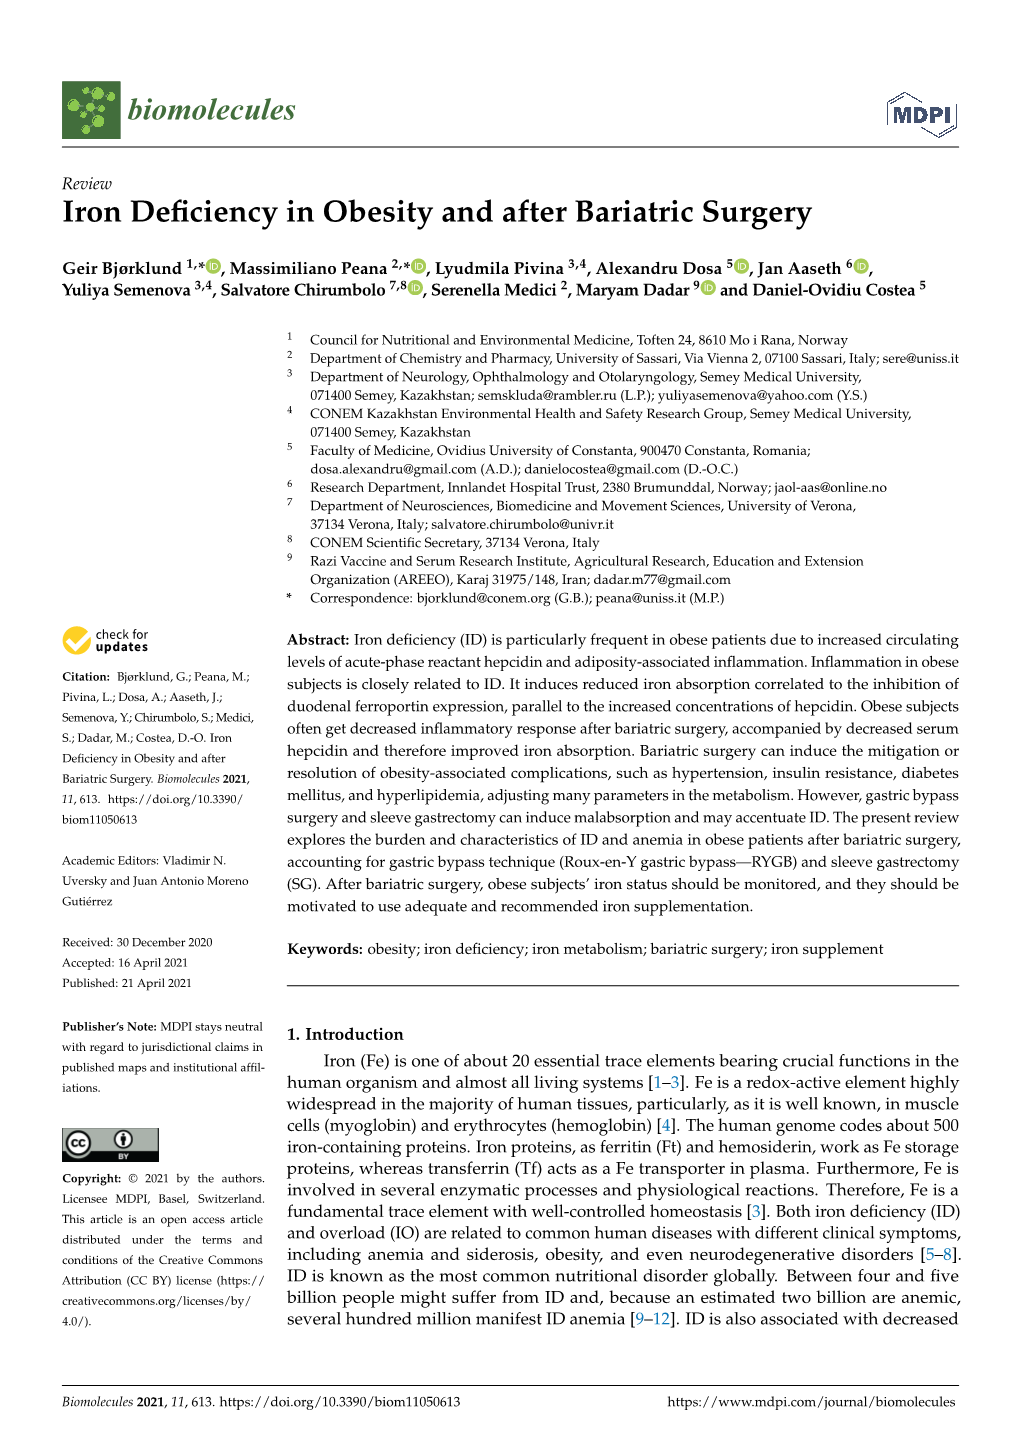 Iron Deficiency in Obesity and After Bariatric Surgery